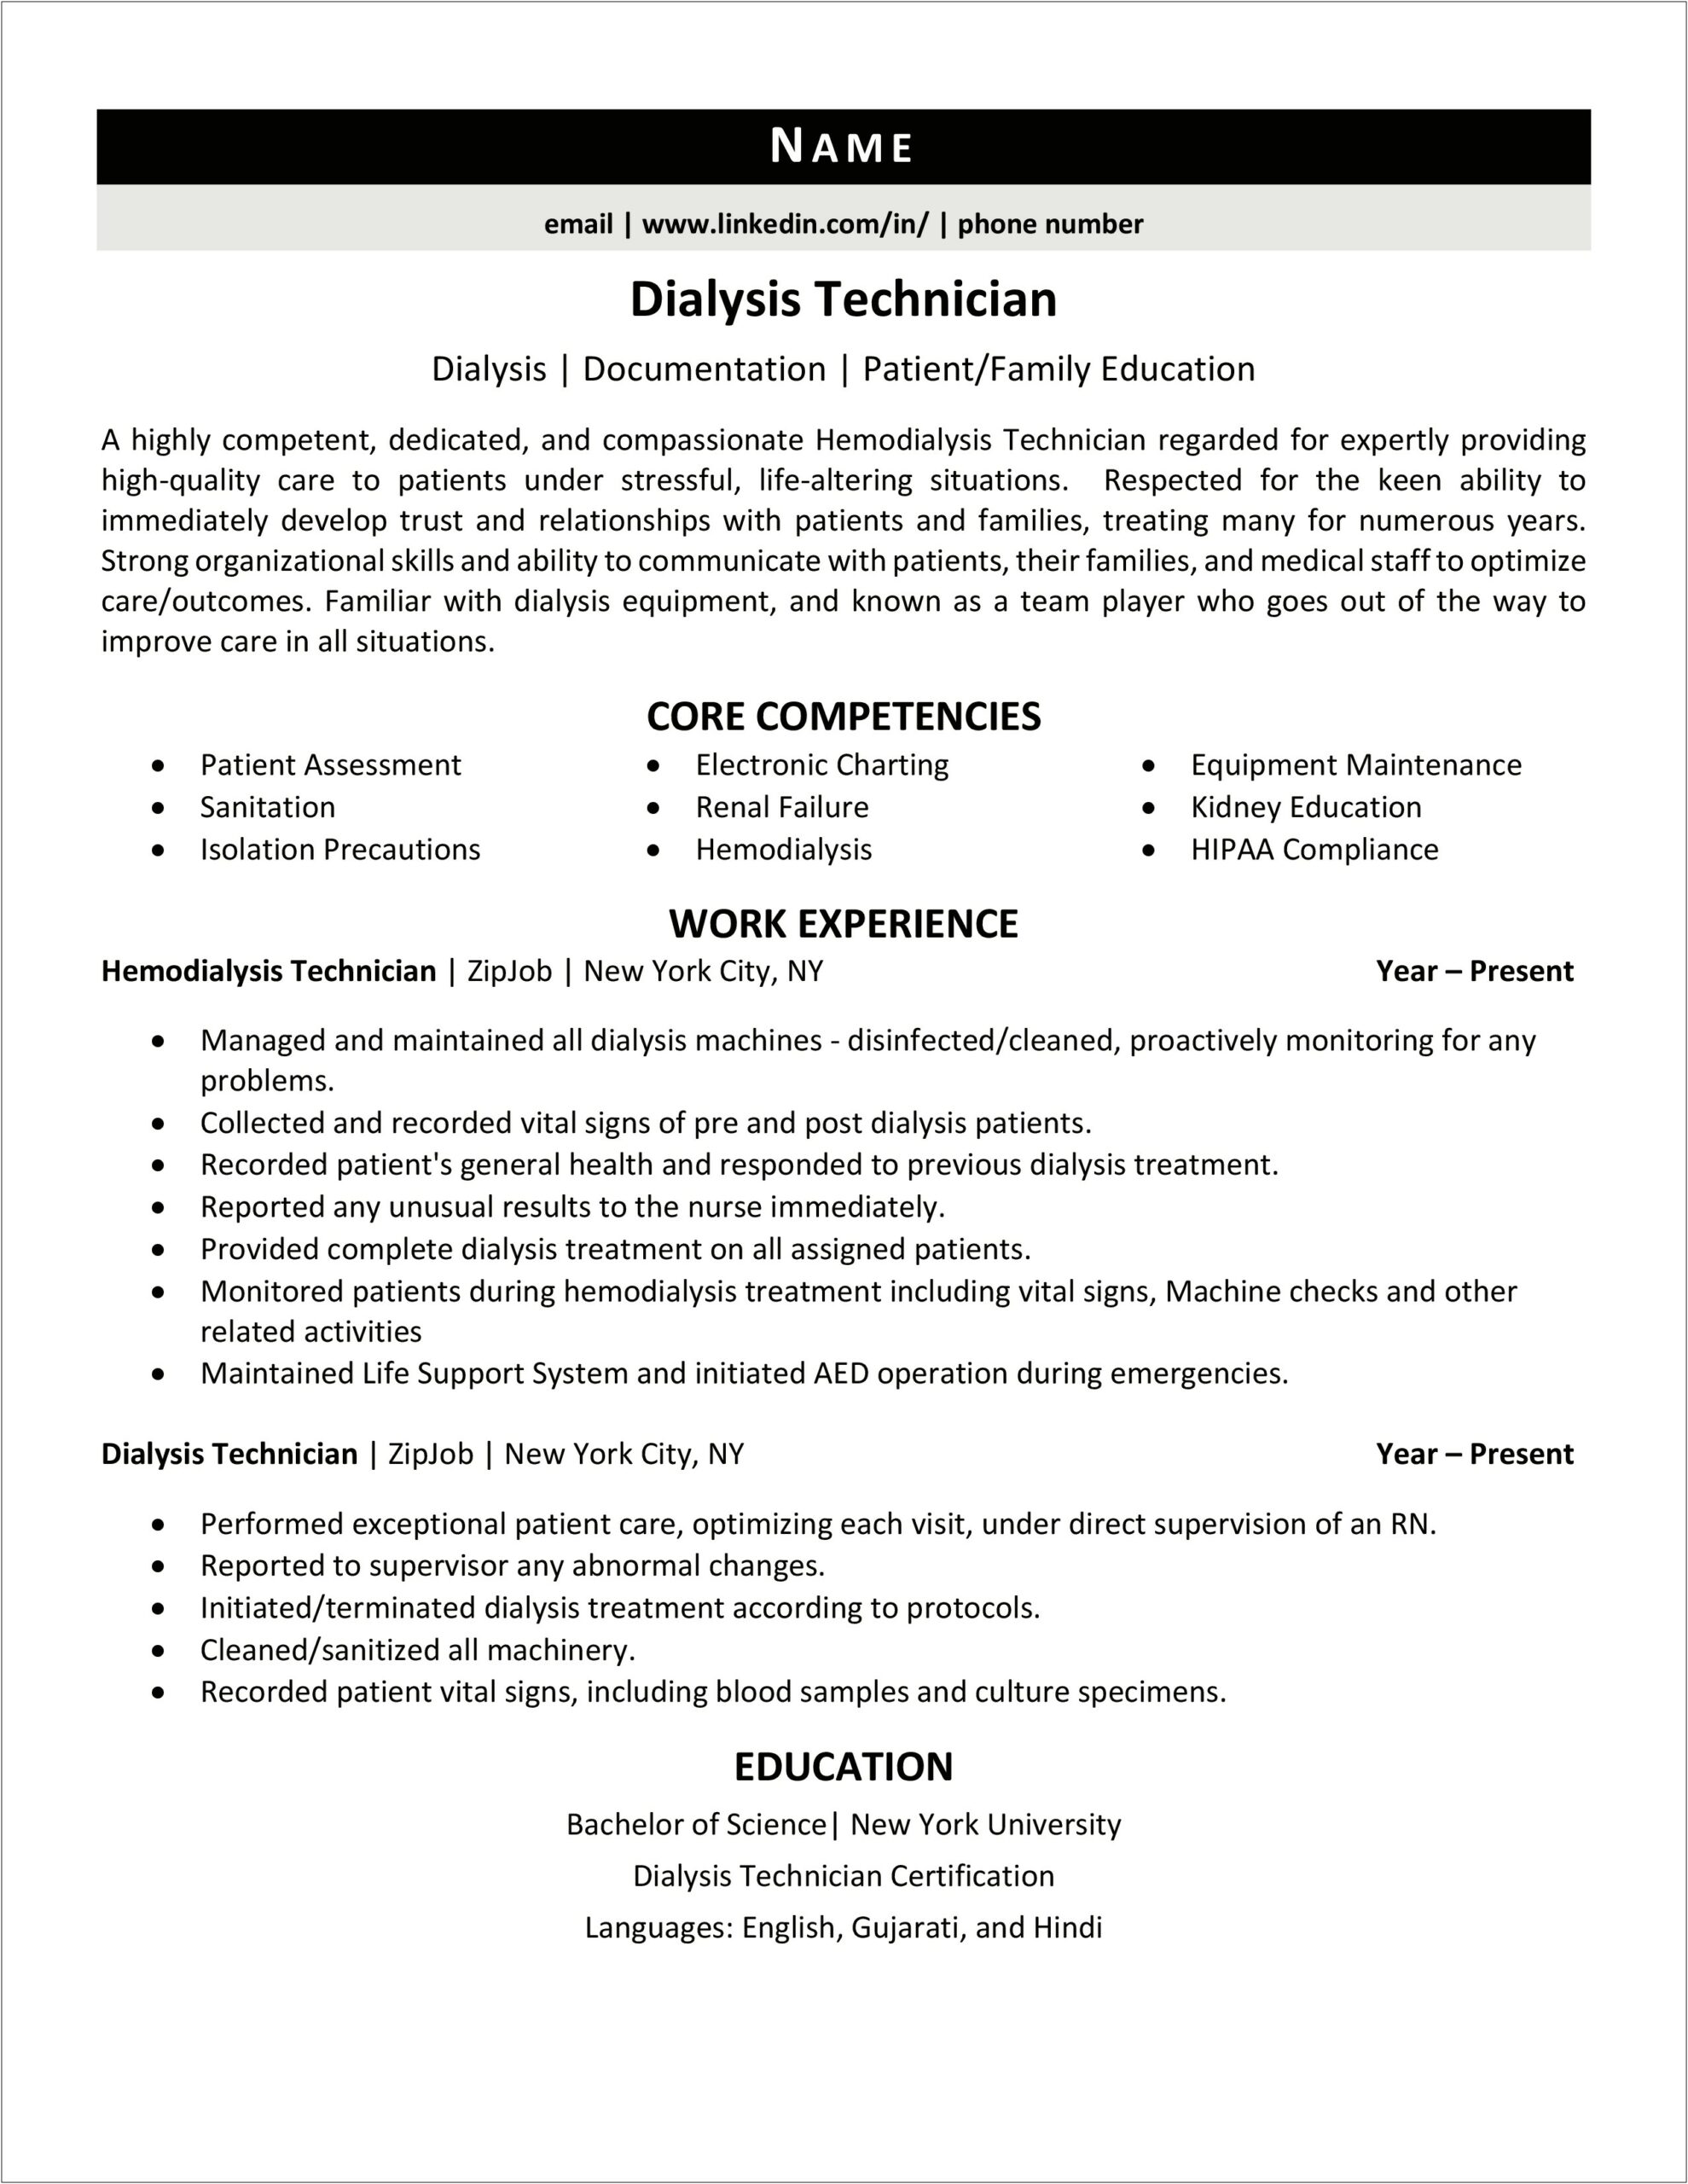 Resume Objective Examples For Dialysis Technician